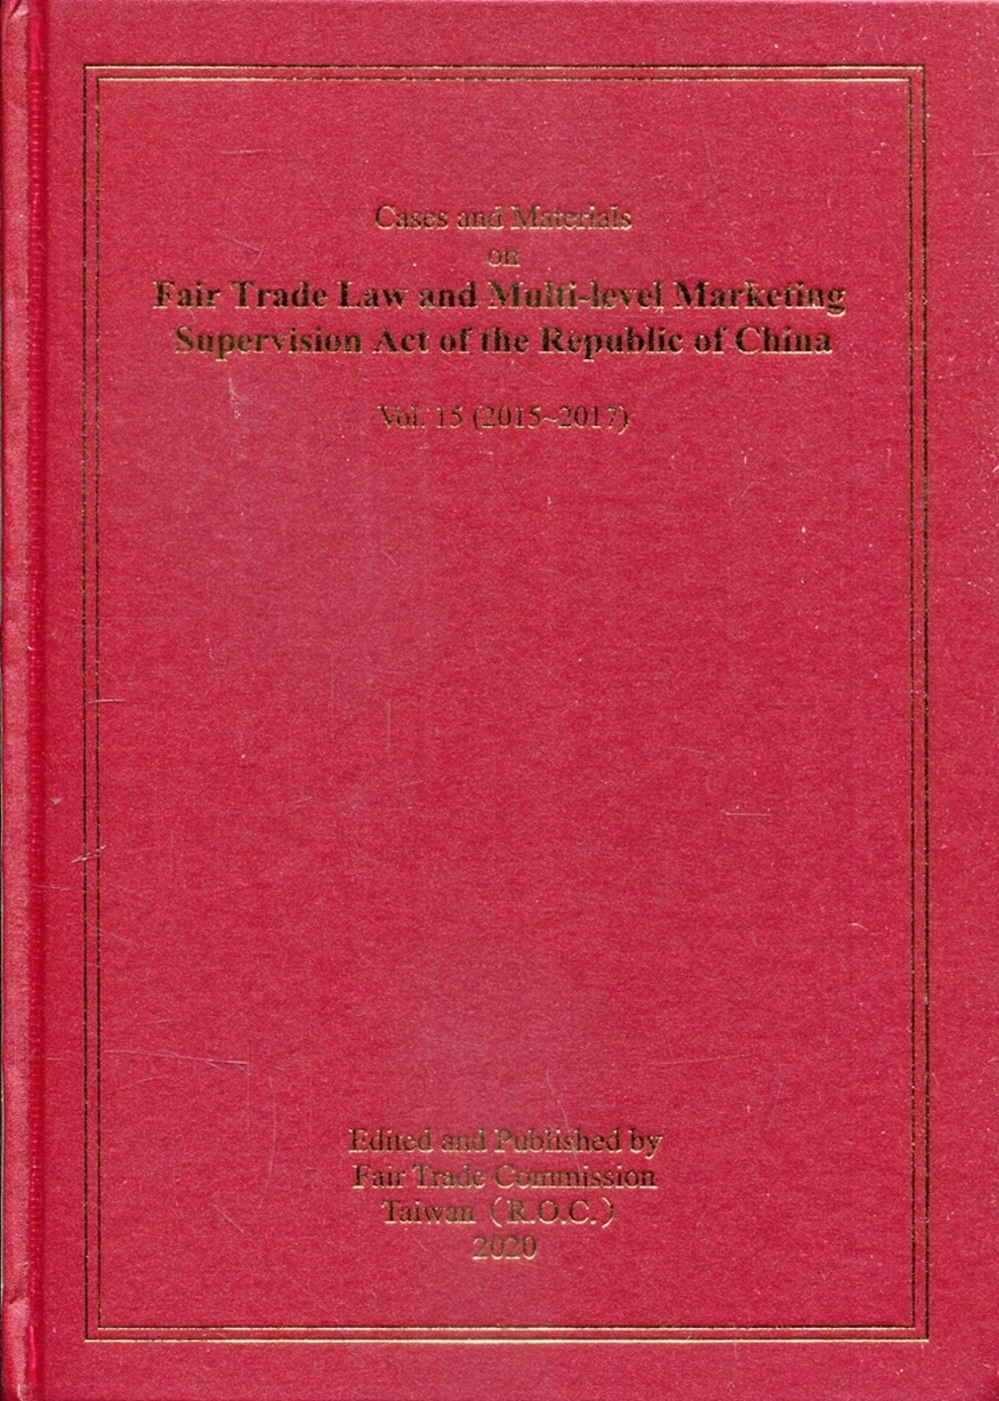 Cases and Materials on Fair Trade Law of the Republic of China Vol.15 (2015-2017)